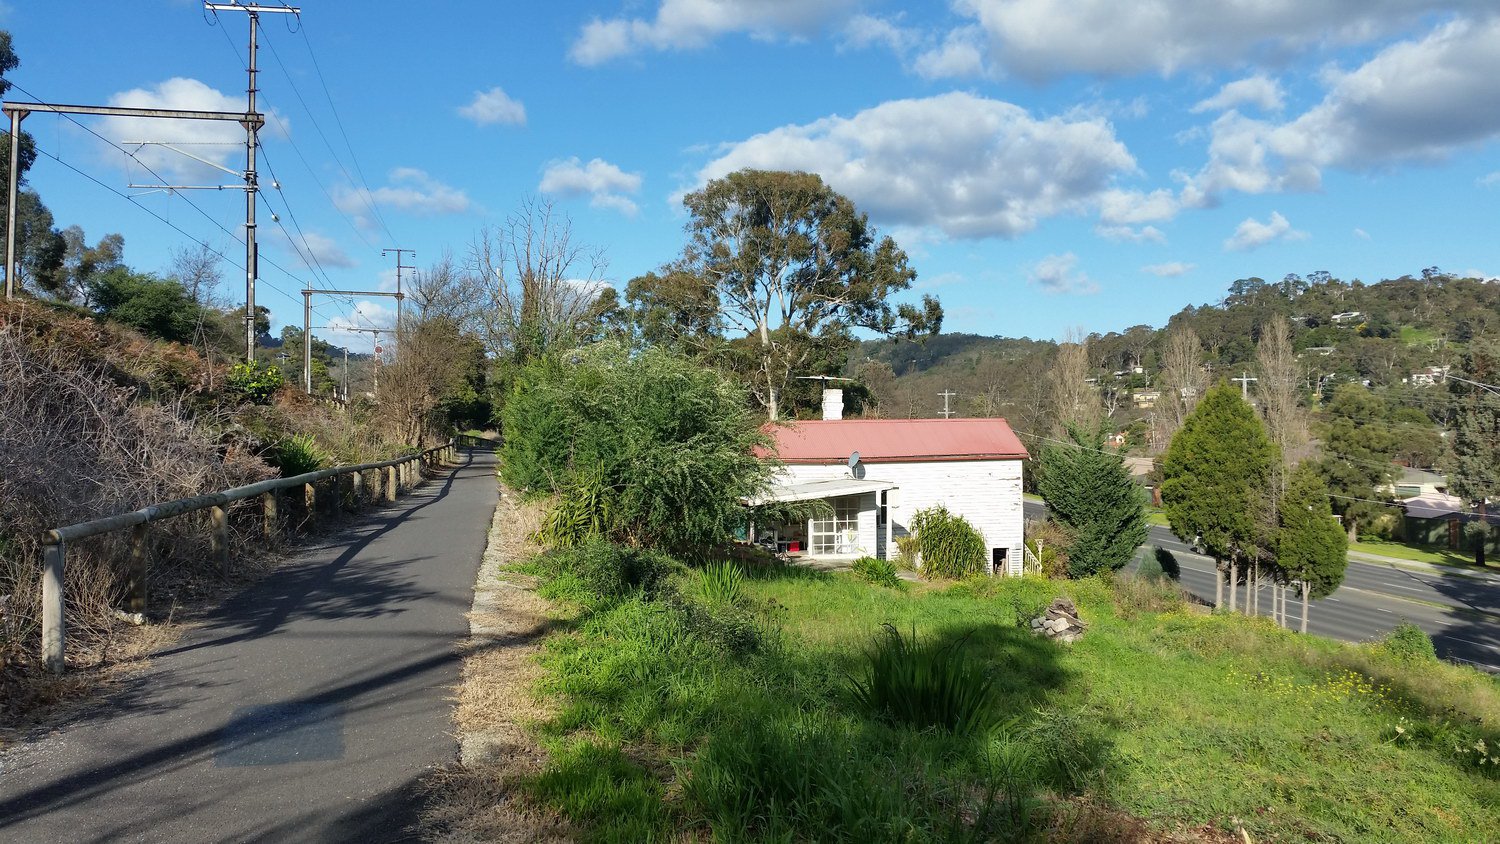 Approaching Upper Ferntree Gully. Ringwood to Belgrave Rail Trail ride. July 2018.